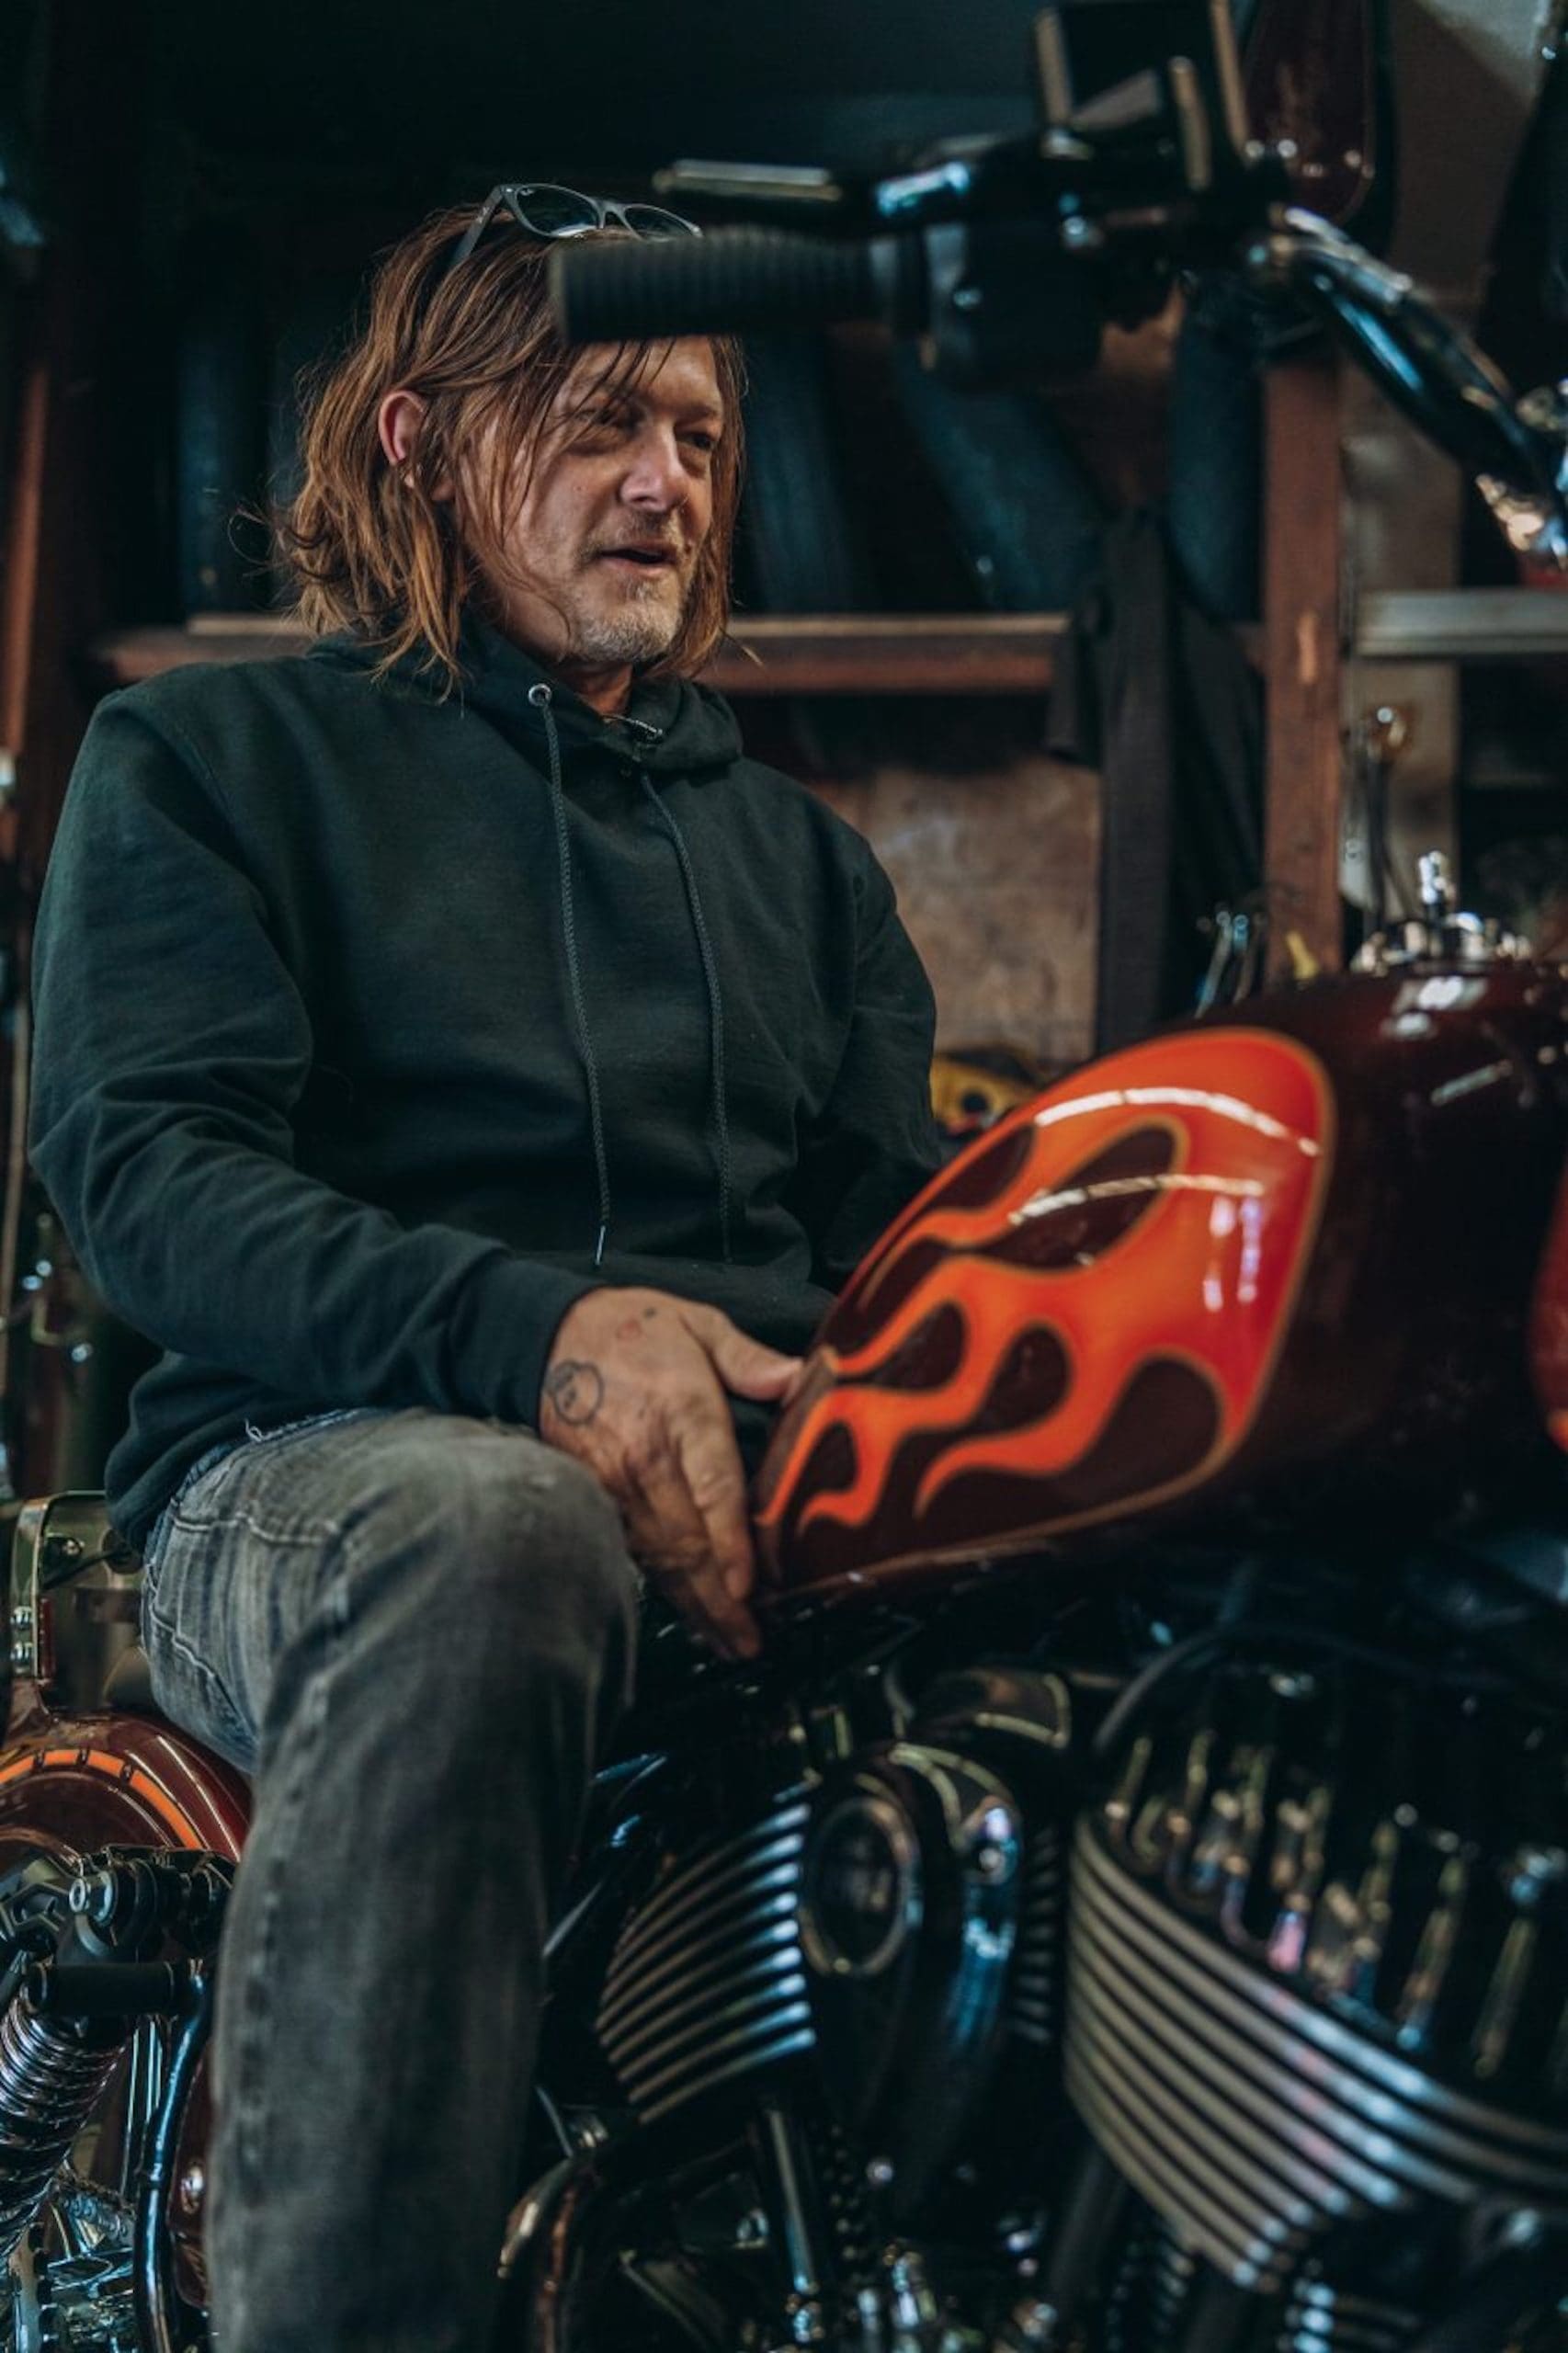 “Walking Dead” actor Norman Reedus' new custom Sport Chief from Indian's "Forged" series. Media sourced from Indian.